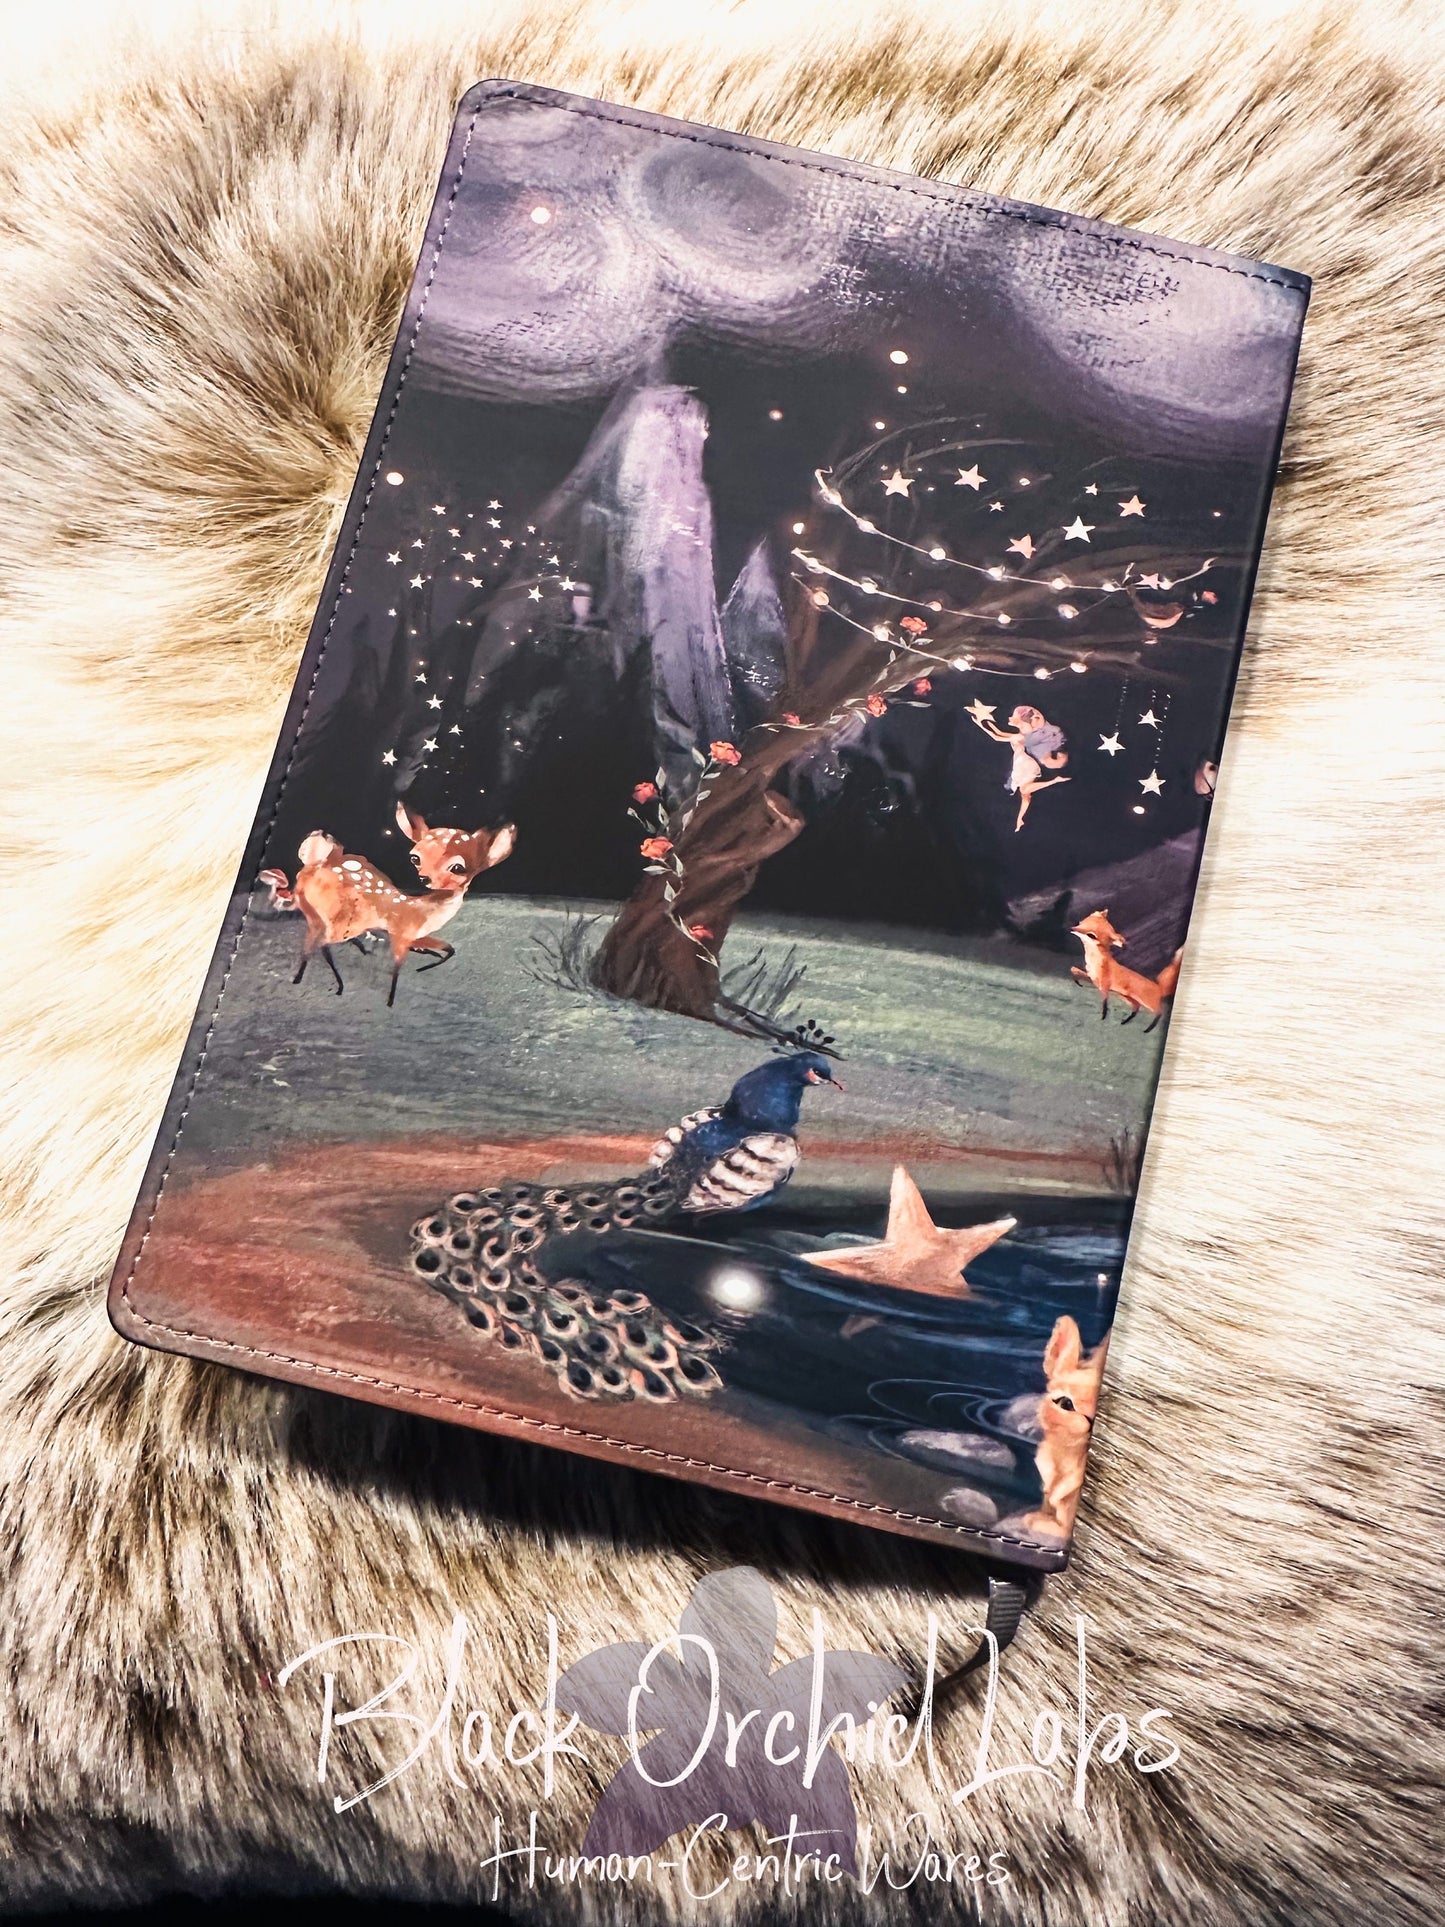 Fairy, cottagecore Vegan Leather Journal, 8”x6”, Dark Academia journal, goth, witchy, gift for her